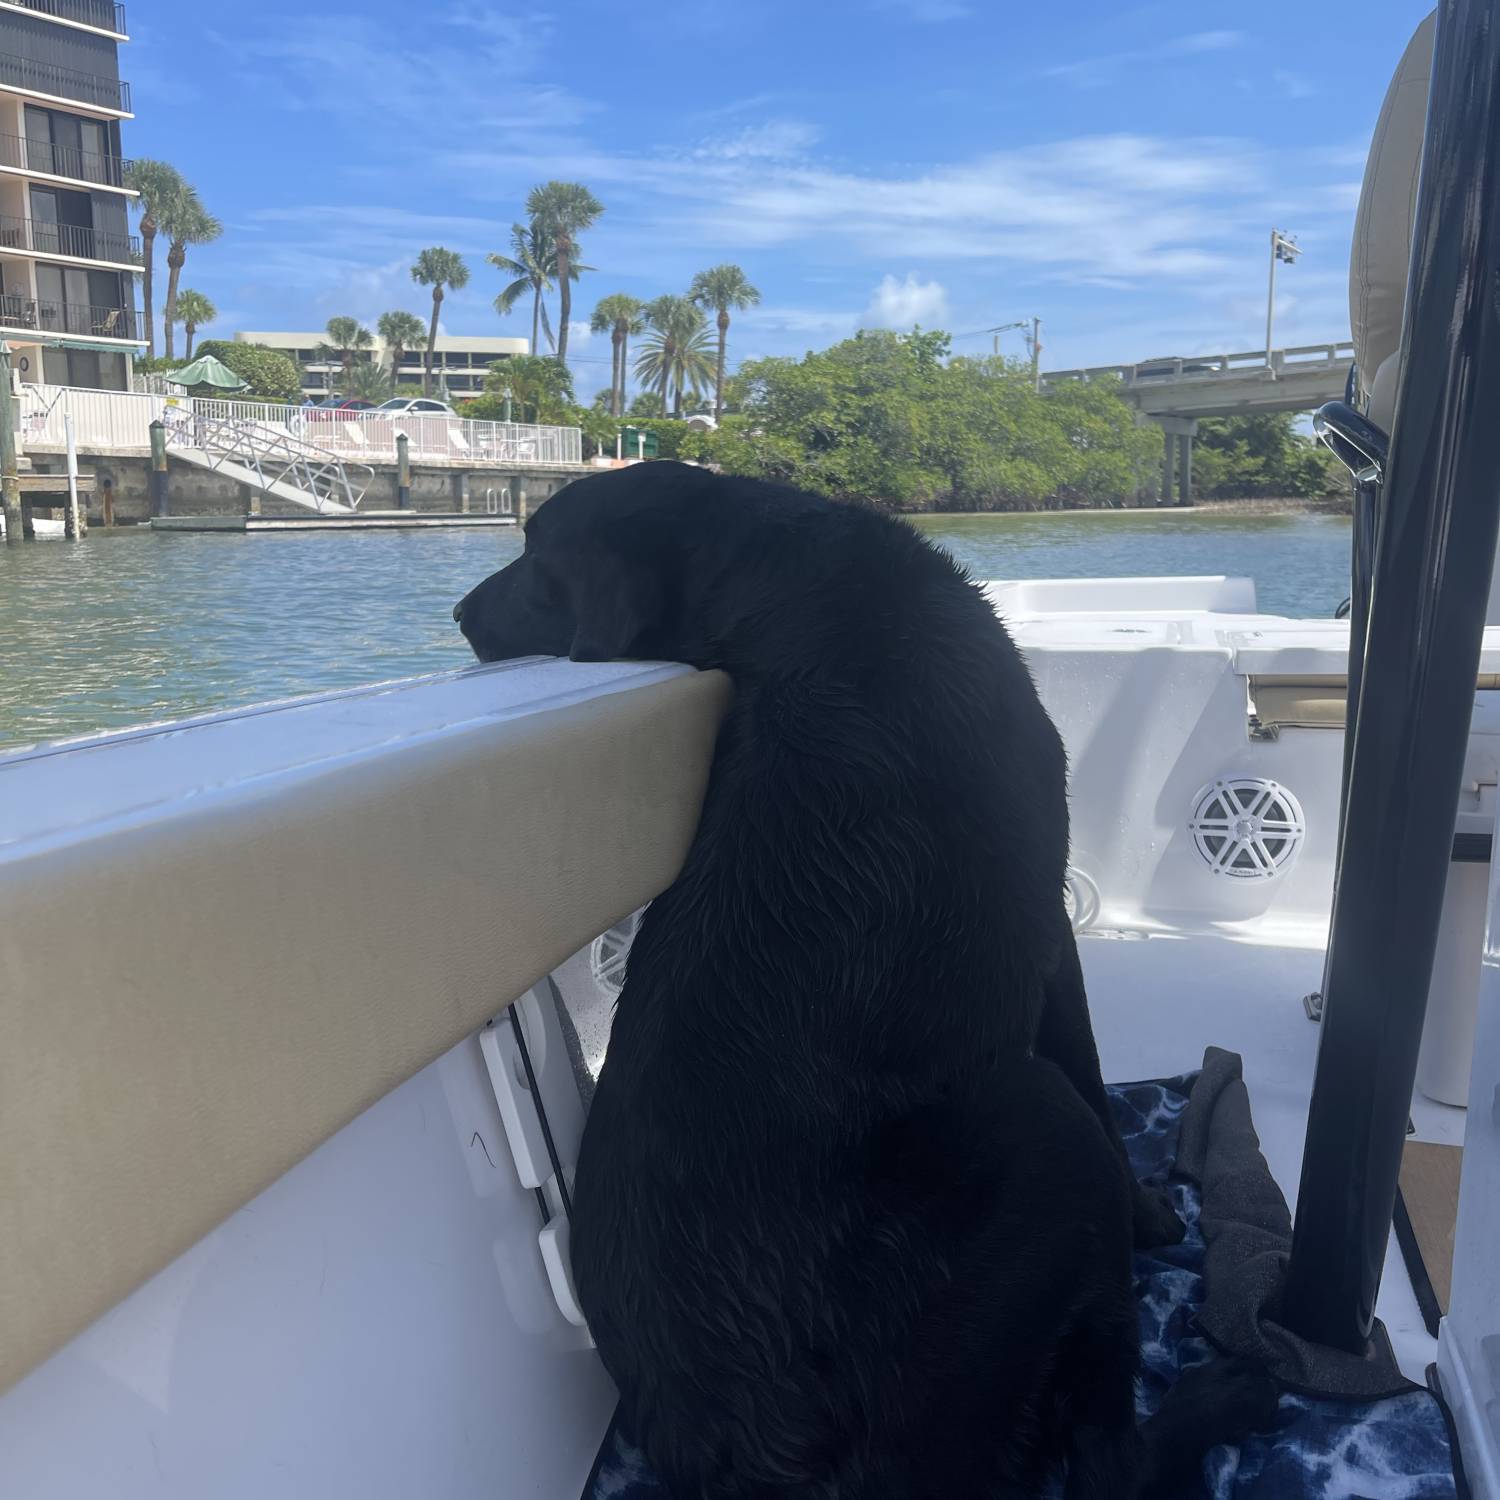 Title: Boat days with Beau - On board their Sportsman Masters 227 Bay Boat - Location: Jupiter, Florida. Participating in the Photo Contest #SportsmanSeptember